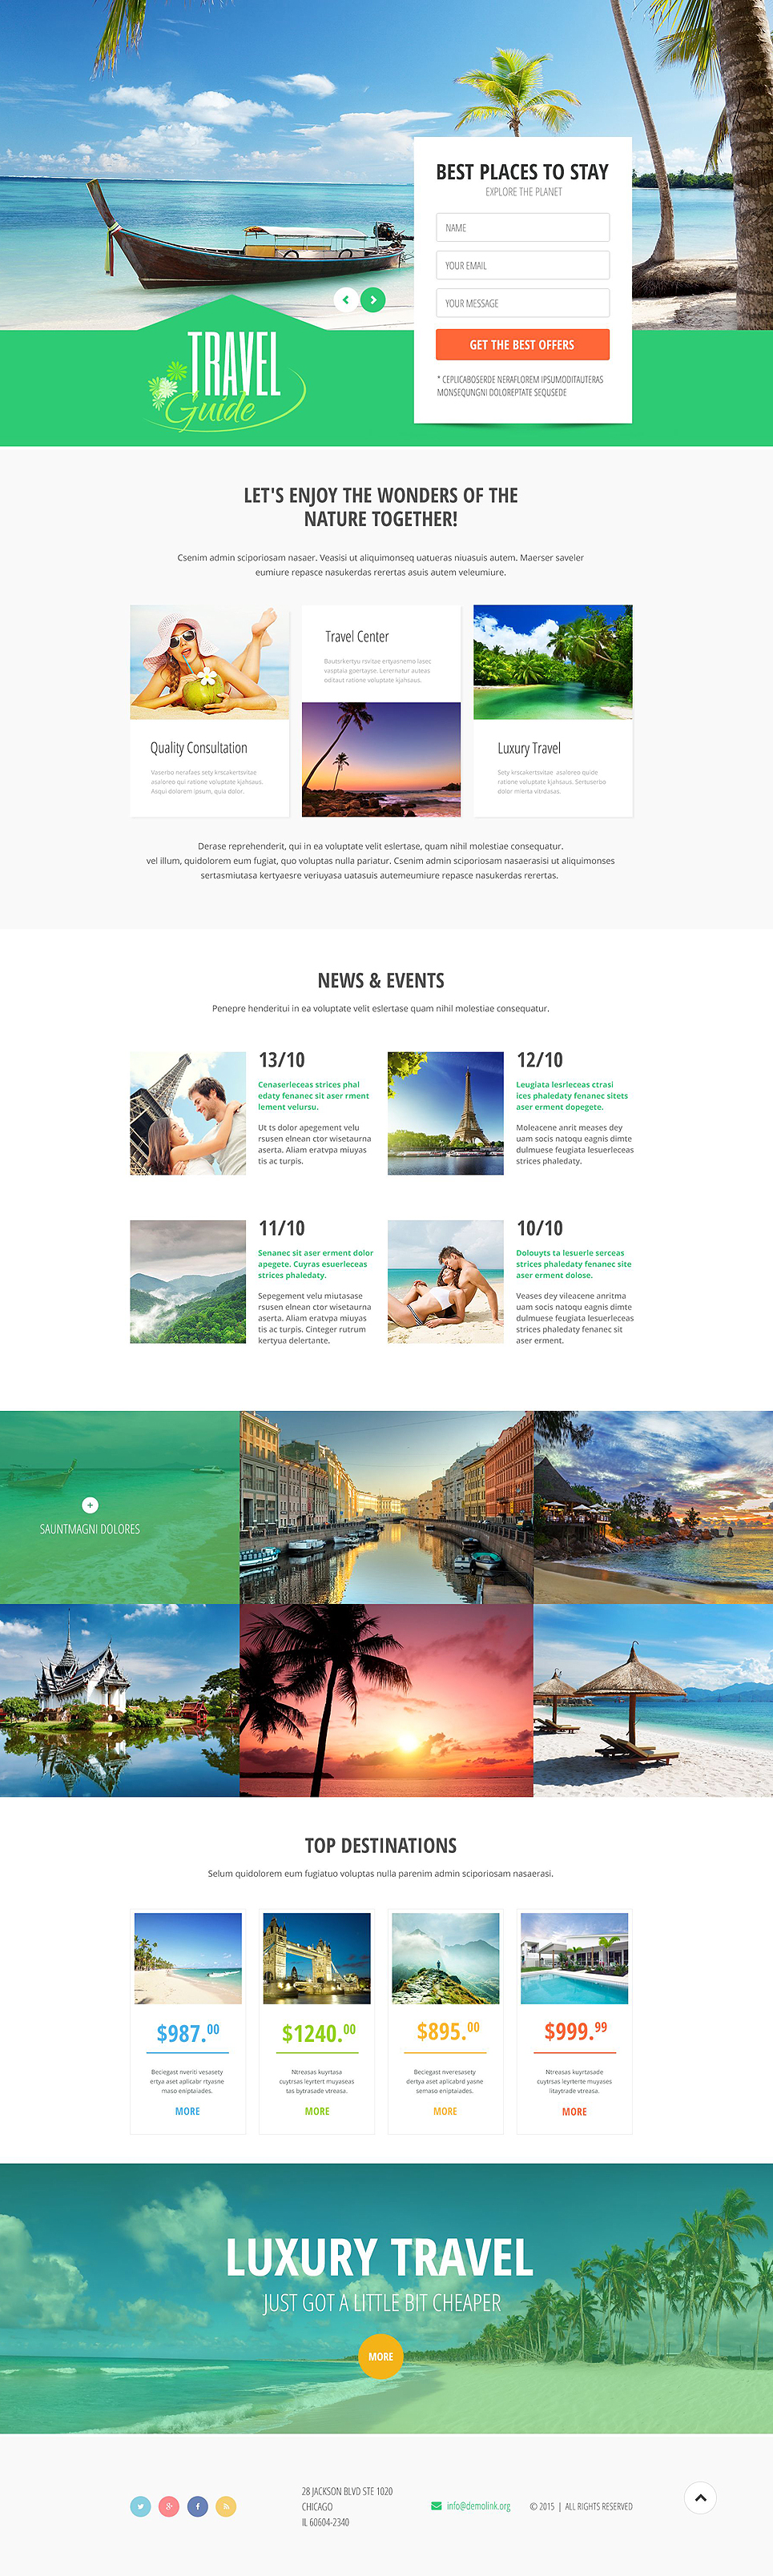 Travel Guide Template Free Download